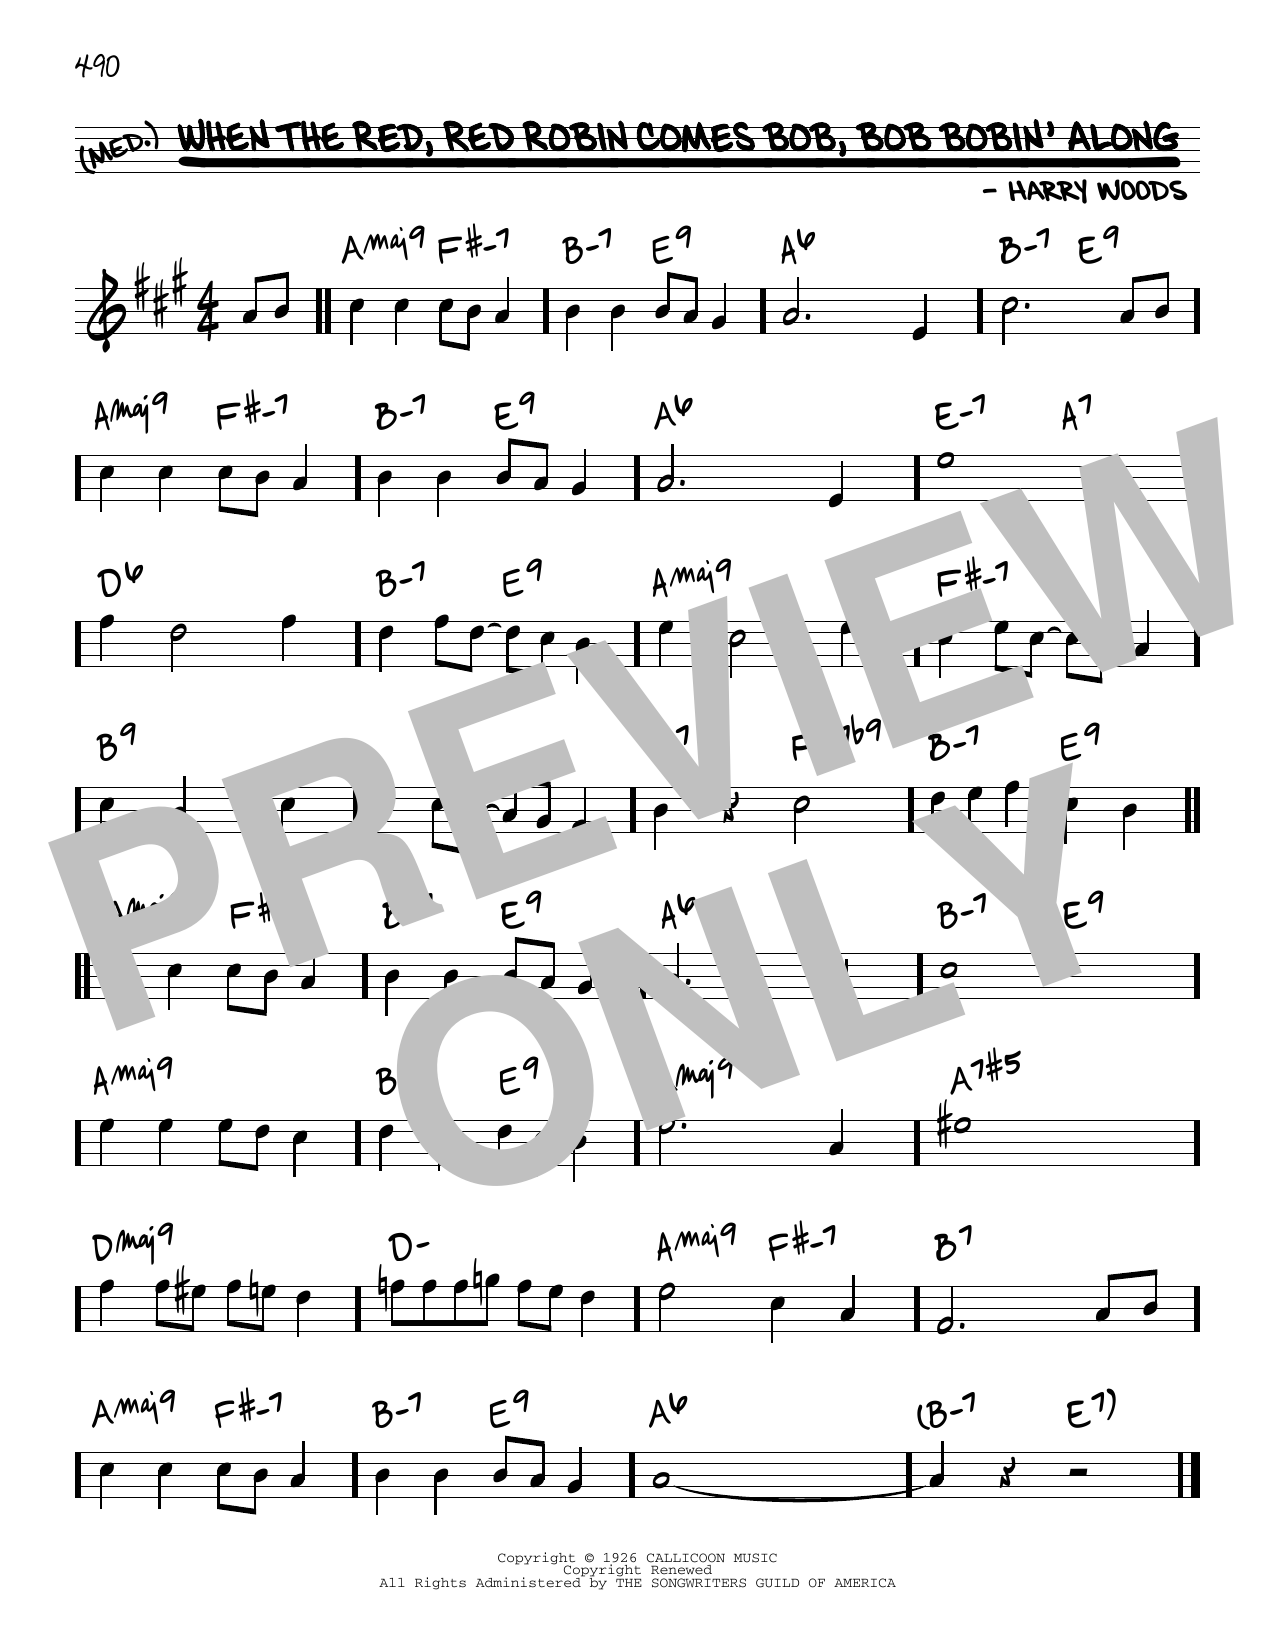 Download Harry Woods When The Red, Red Robin Comes Bob, Bob Sheet Music